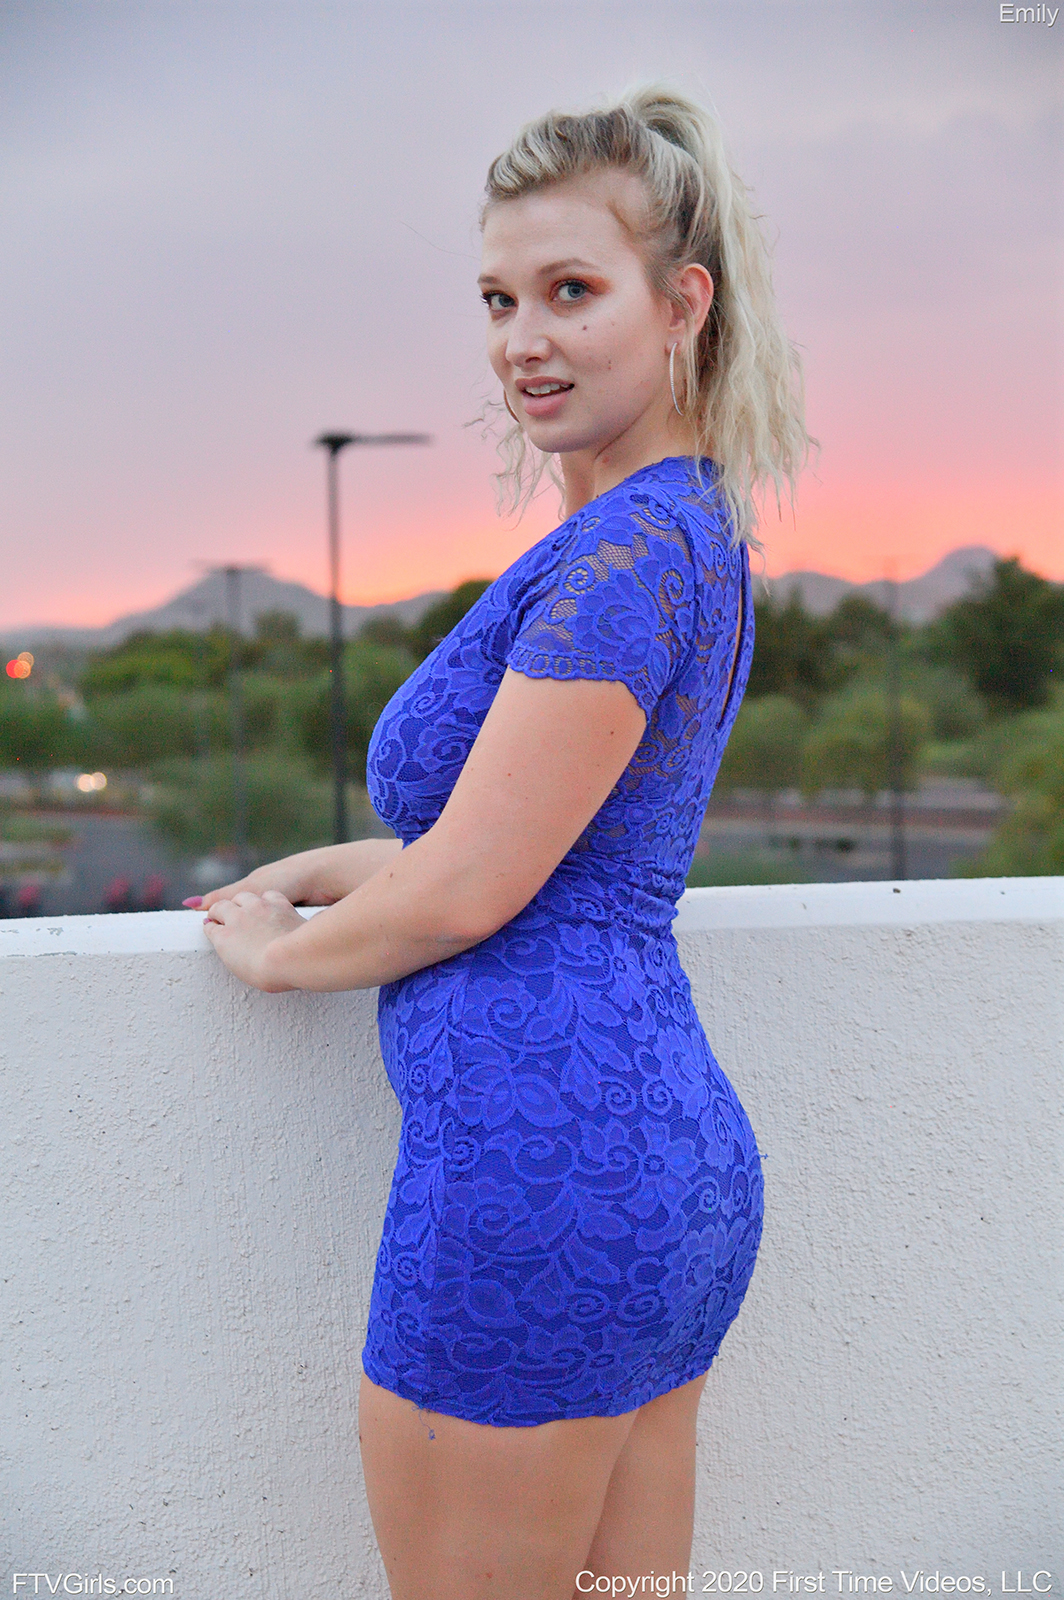 teen pornstar Emily FTV is non nude wearing a blue sexy fit dress while standing beside a wall in Sunset Finale